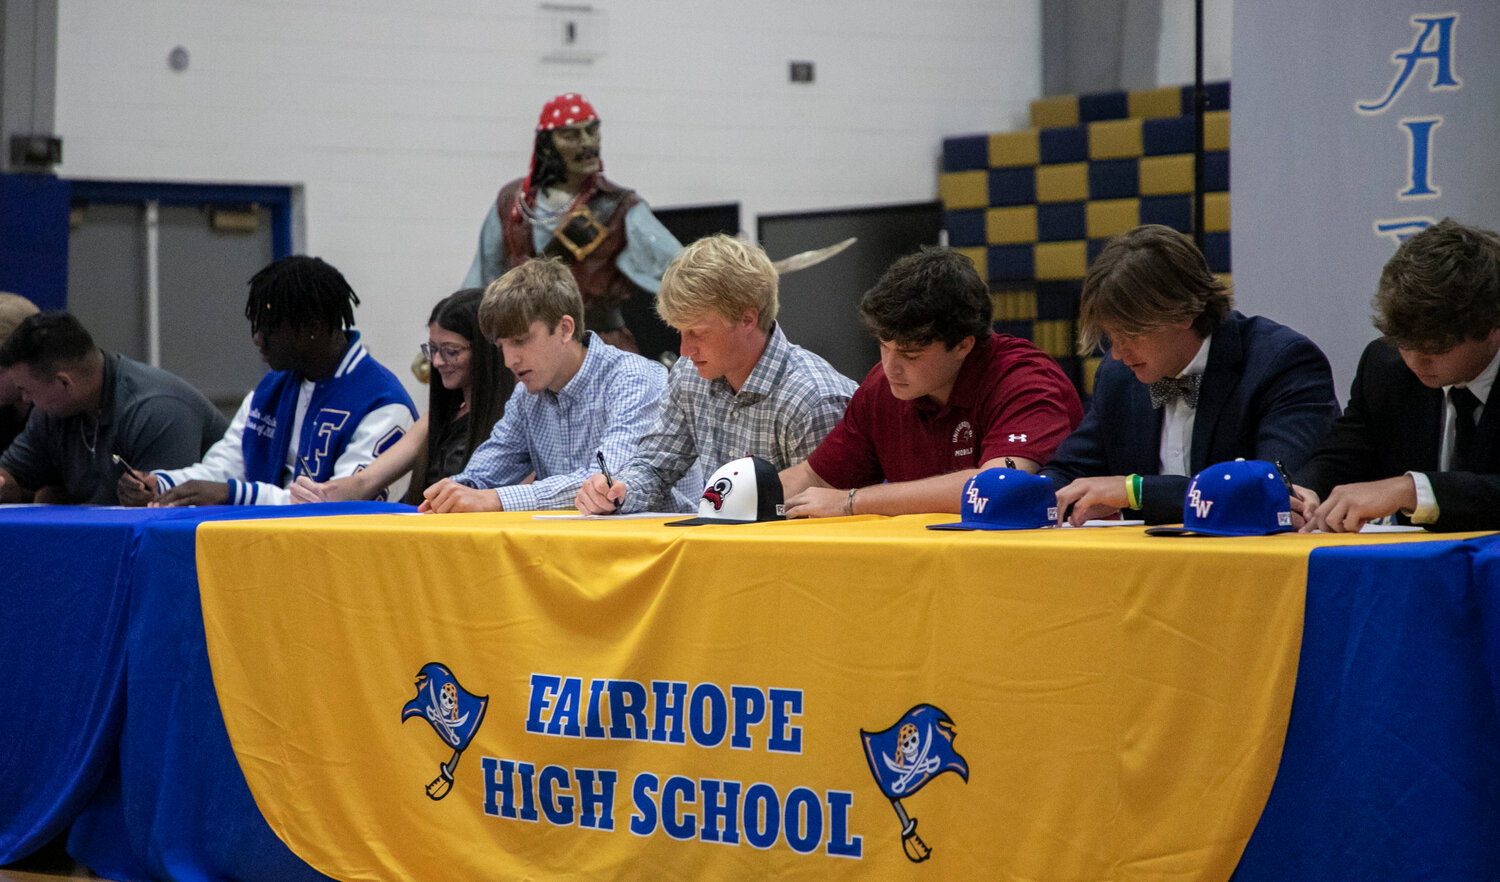 A group of 17 student-athletes from Fairhope High School signed National Letters of Intent Monday, April 17, during a ceremony in the gymnasium. Among the signees included, from left, Qualin McCants, Michelle Bossard, Zachery Wyatt, Brooks Brasfield, Jacob Conway, Hollon Brock and Jackson Hatcher.